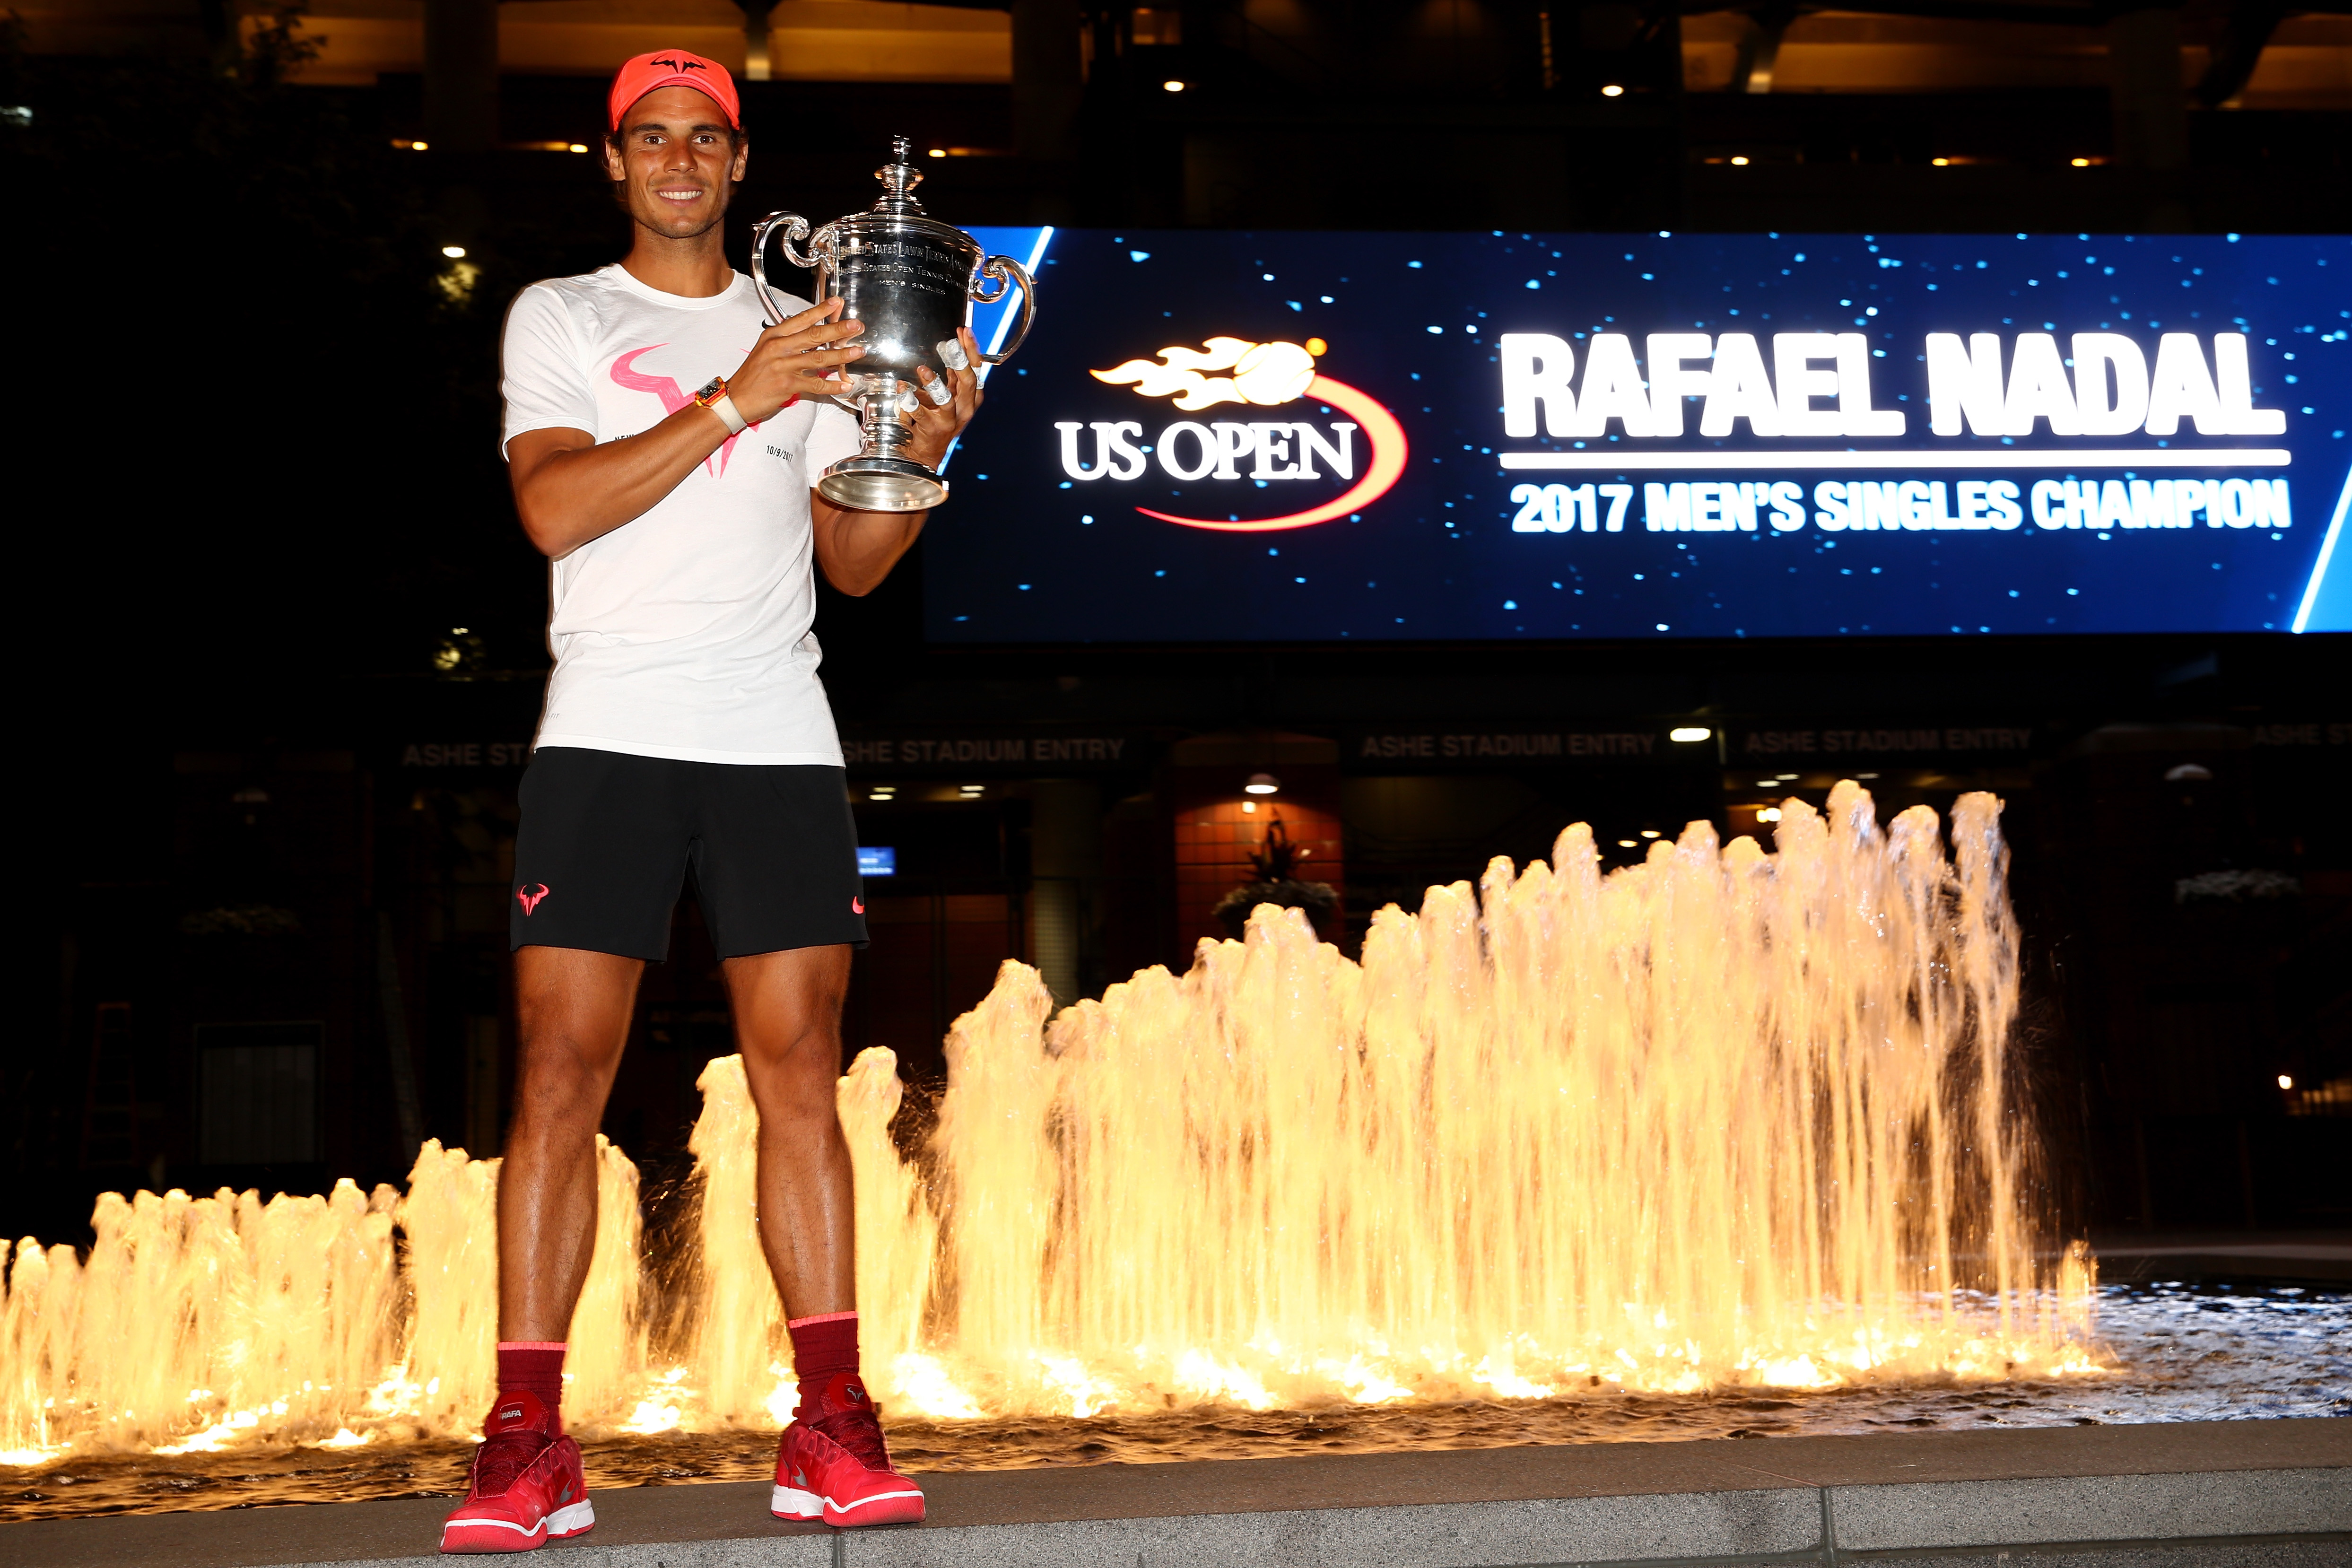 Rafael Nadal has a lot more to offer, claims Carlos Moya